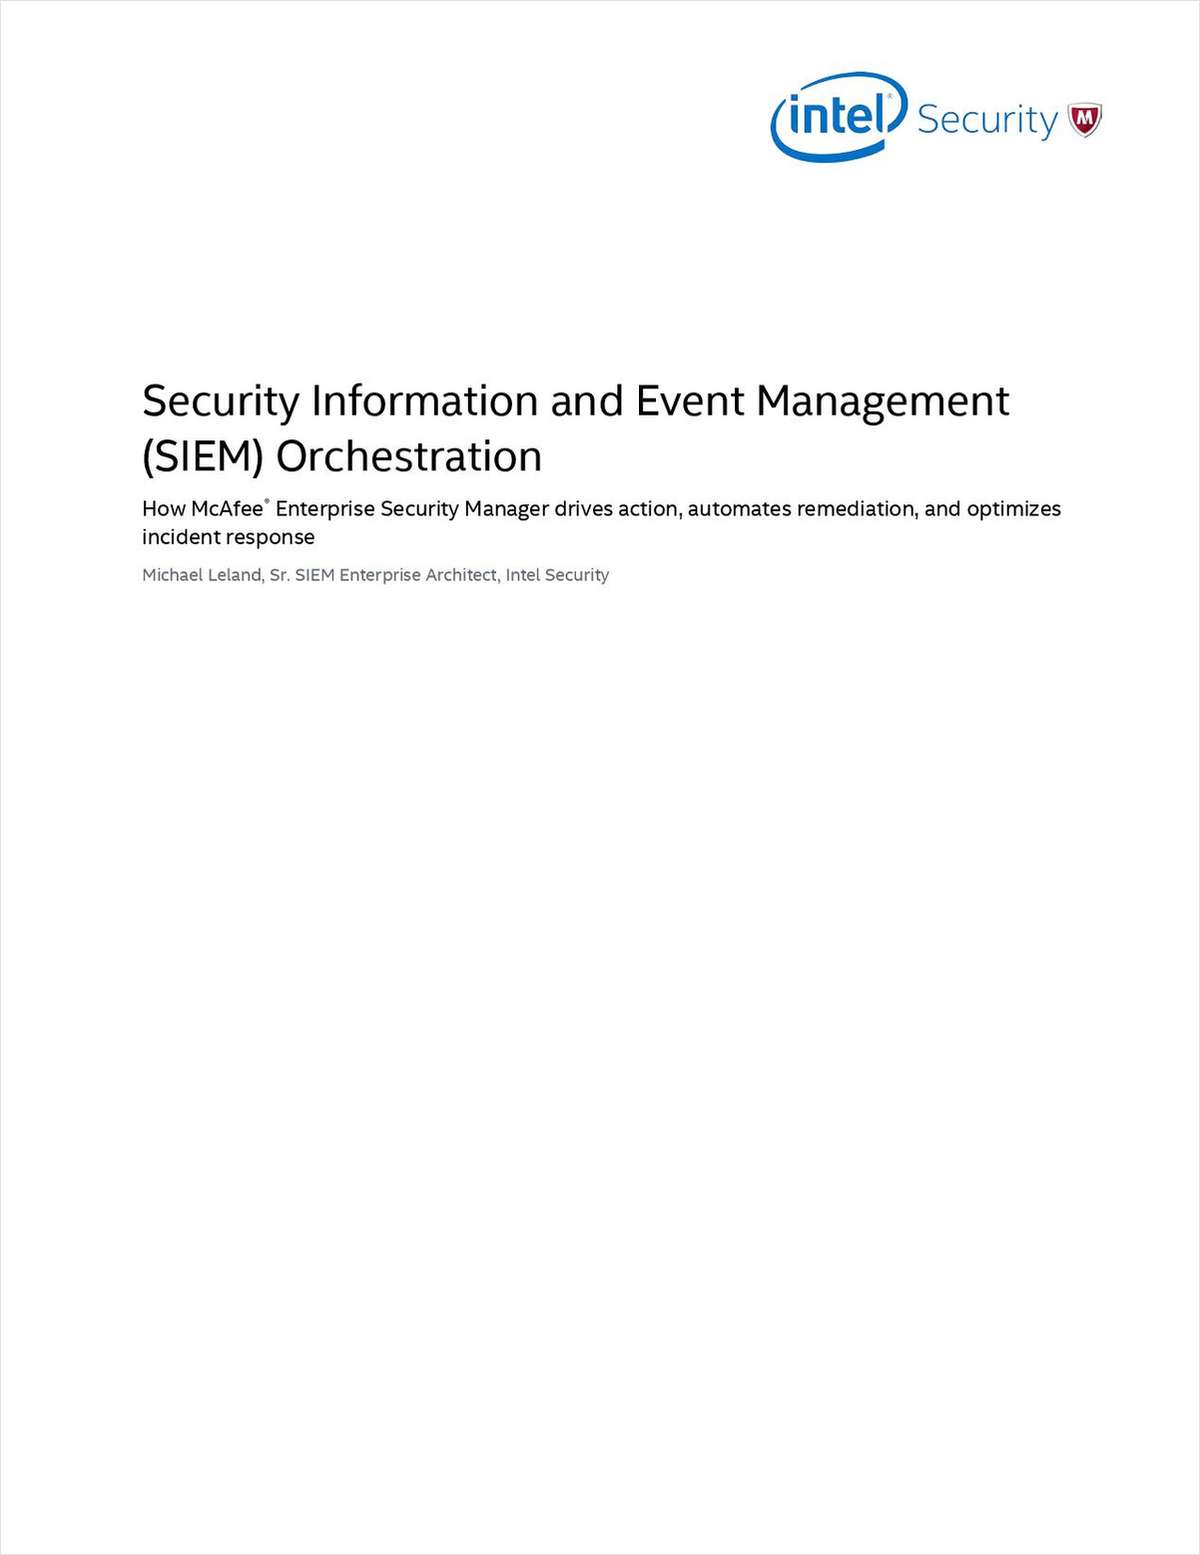 Security Information and Event Management (SIEM) Orchestration